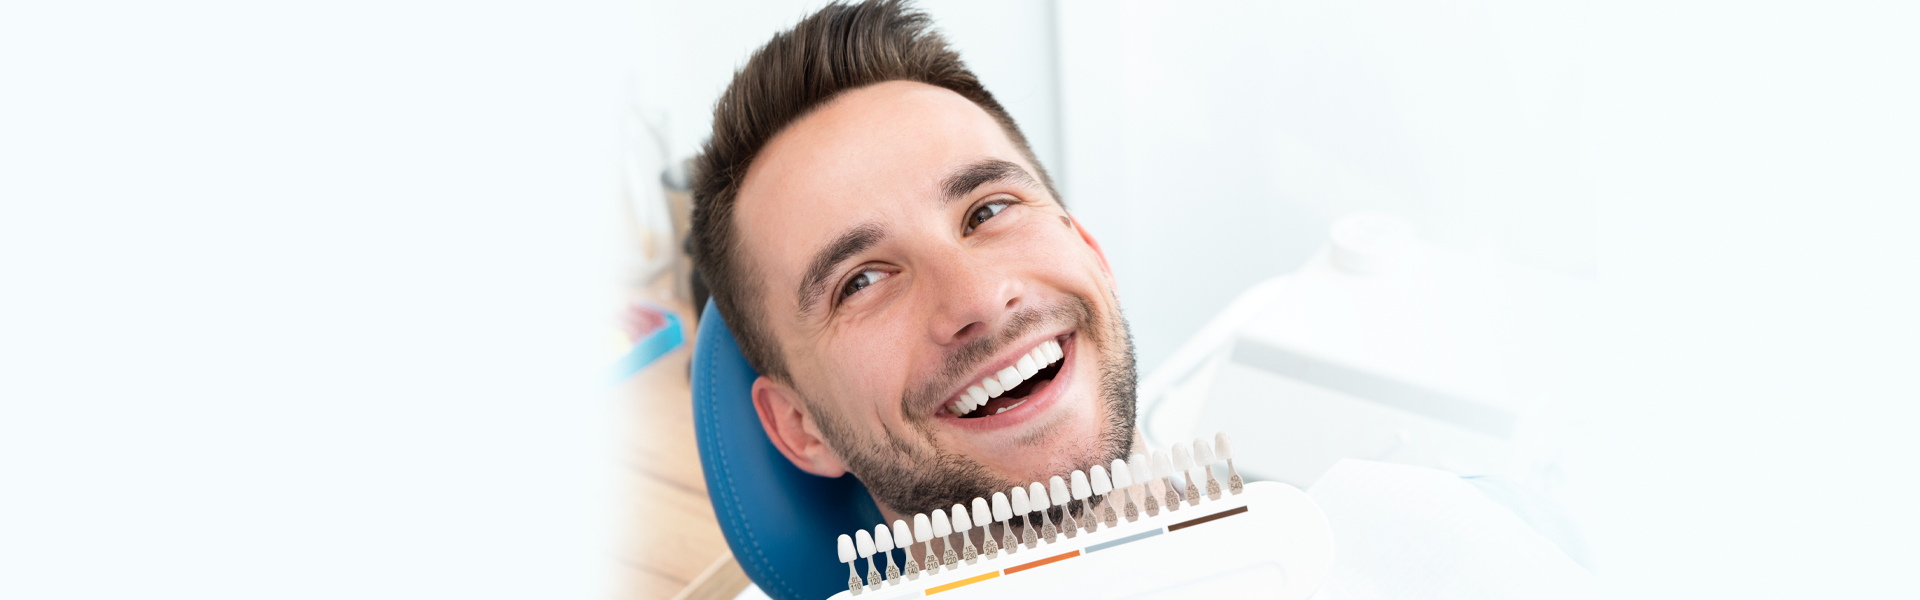 What Are Dental Veneers and How Do They Work?